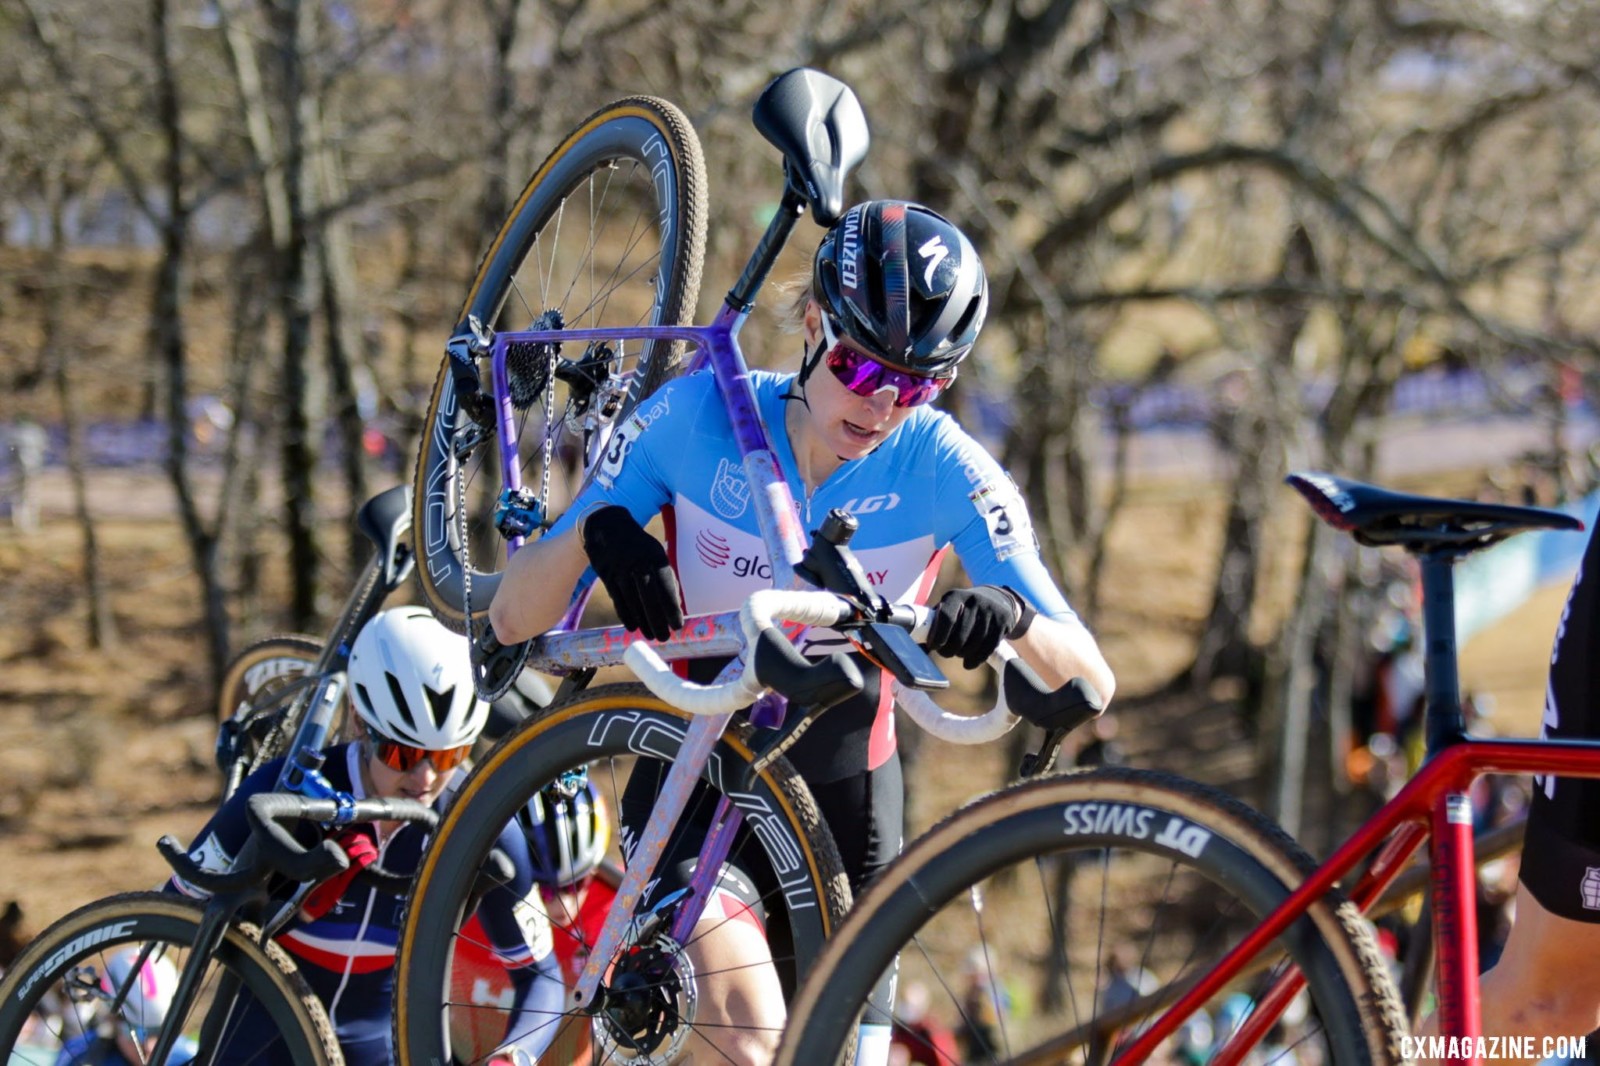 Maghalie Rochette overcame a rocky 2021 to take 7th at the 2022 Cyclocross World Championships Elite Women's race. Fayetteville, Arkansas USA. © D. Mable / Cyclocross Magazine